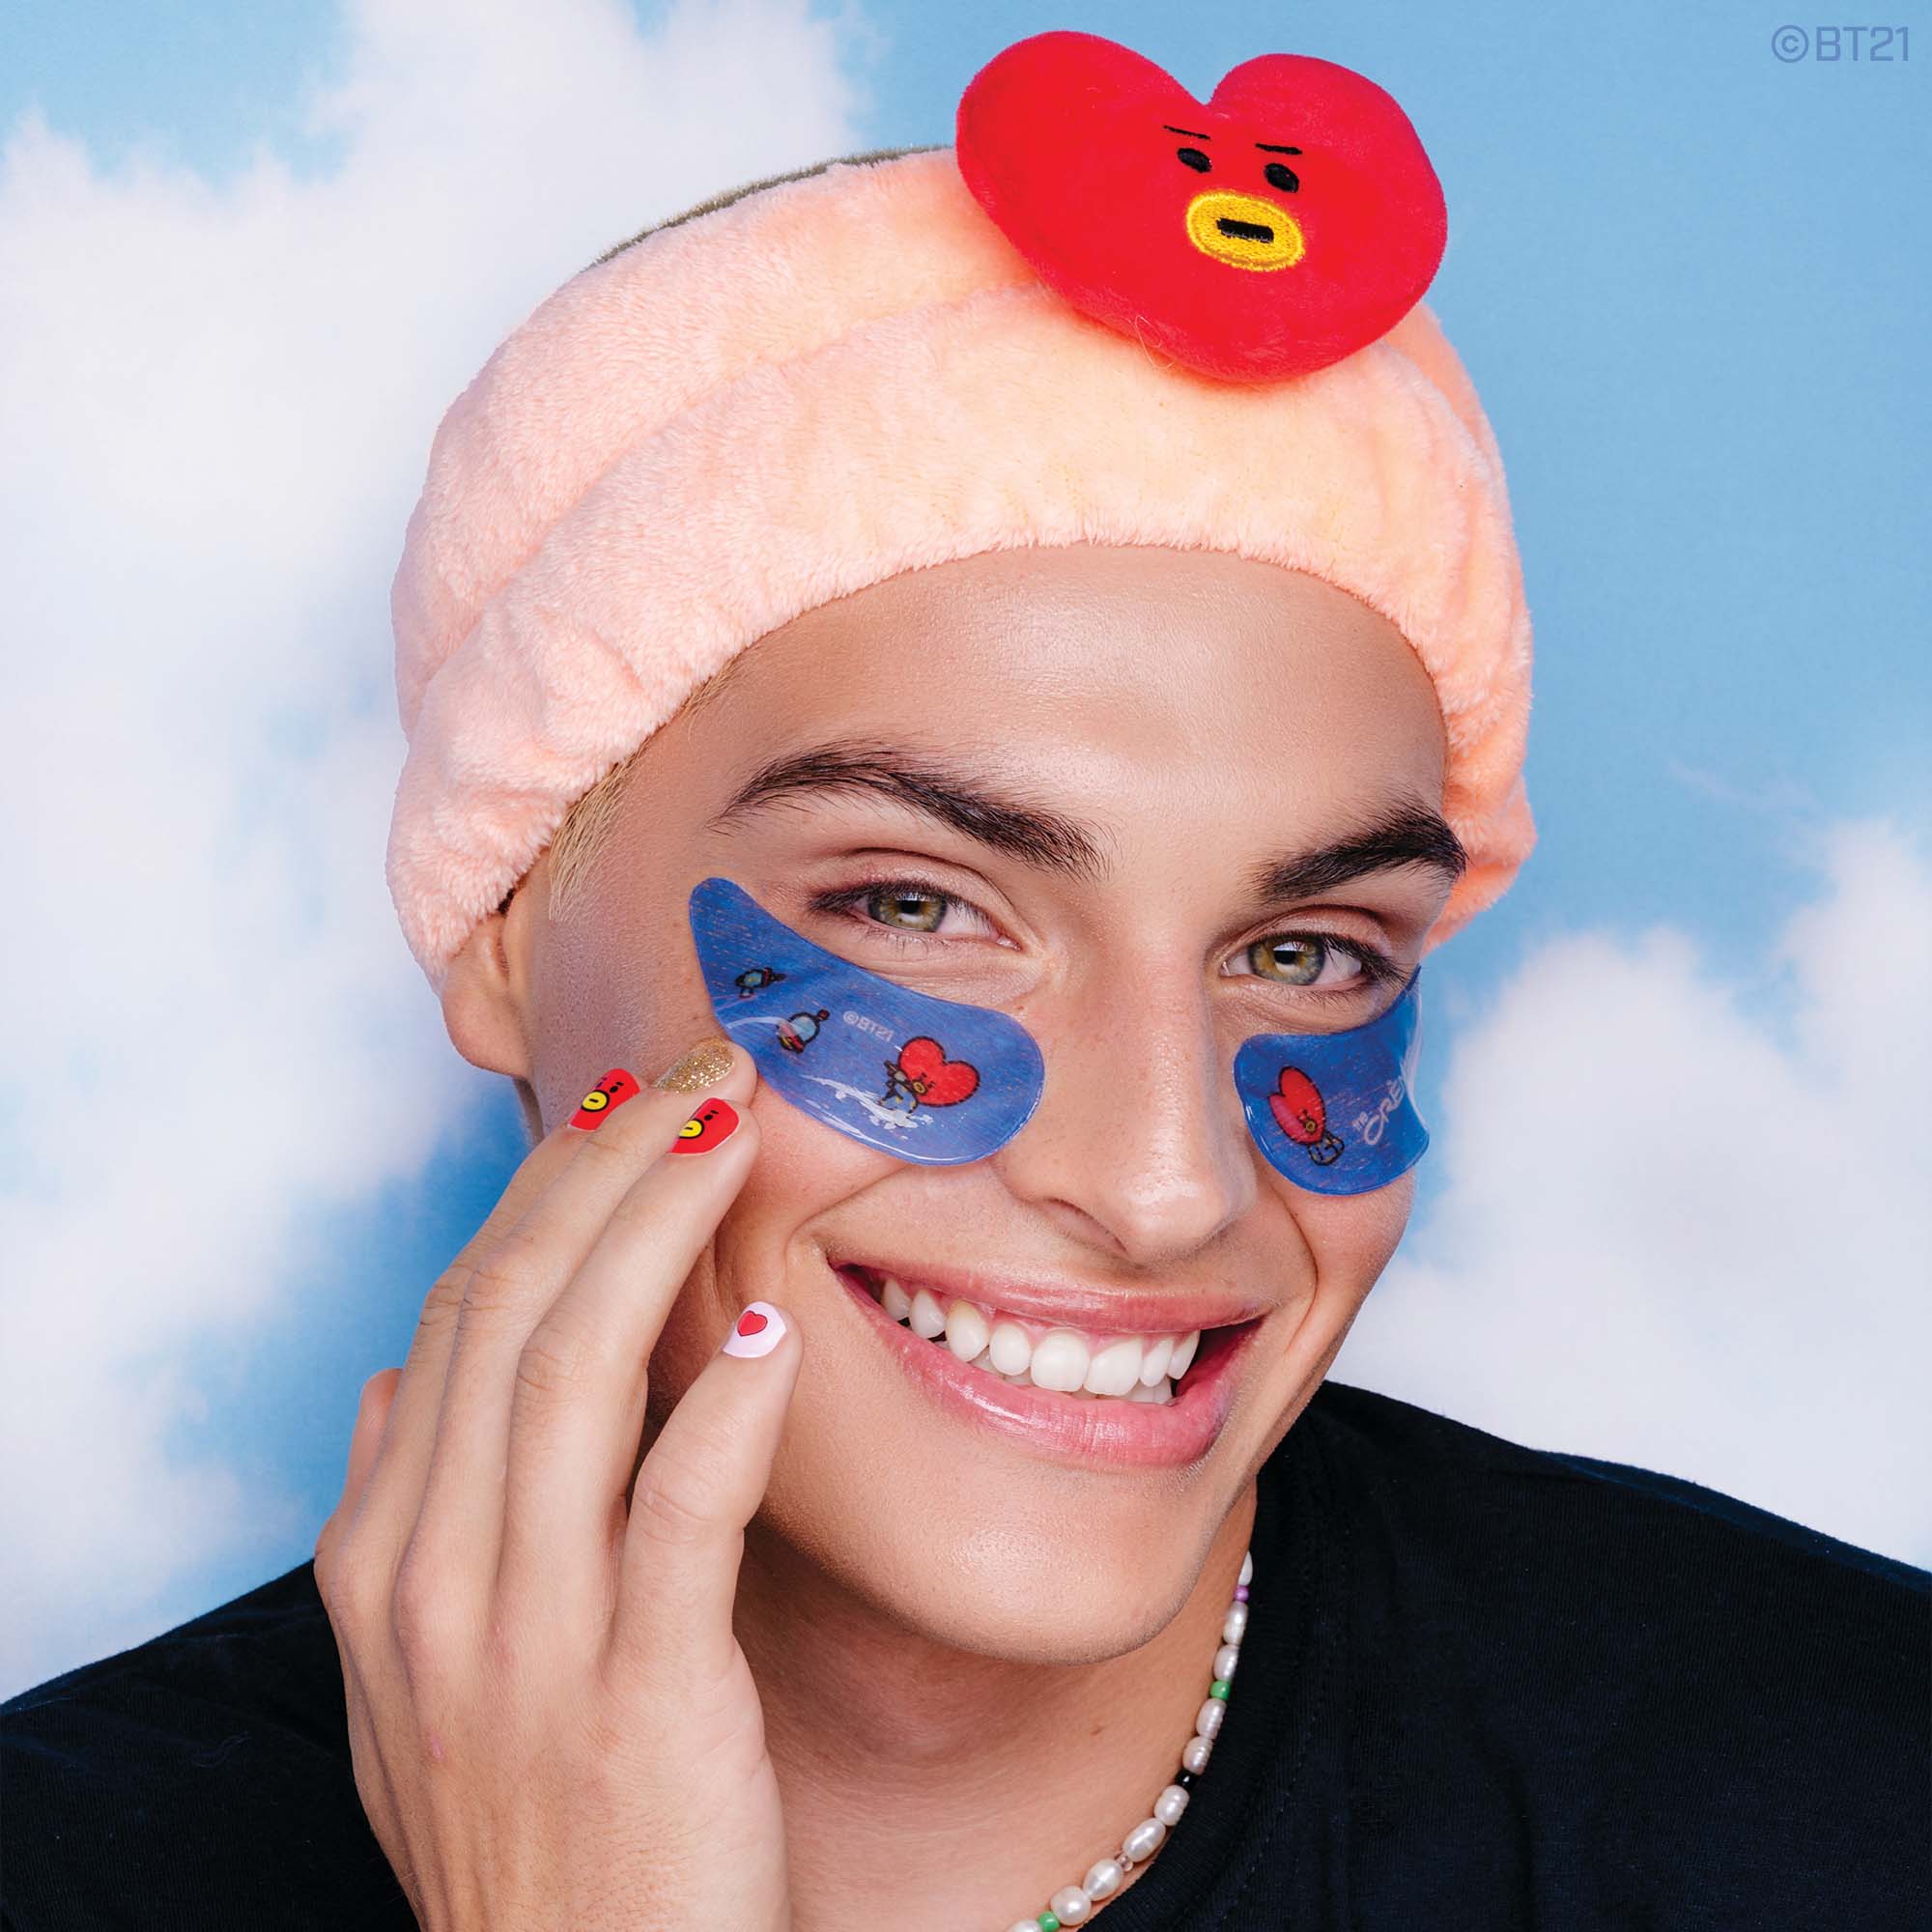 “Smooth Moves!” TATA Hydrogel Under Eye Patches | Plumping & Smoothing Under Eye Patches The Crème Shop x BT21 